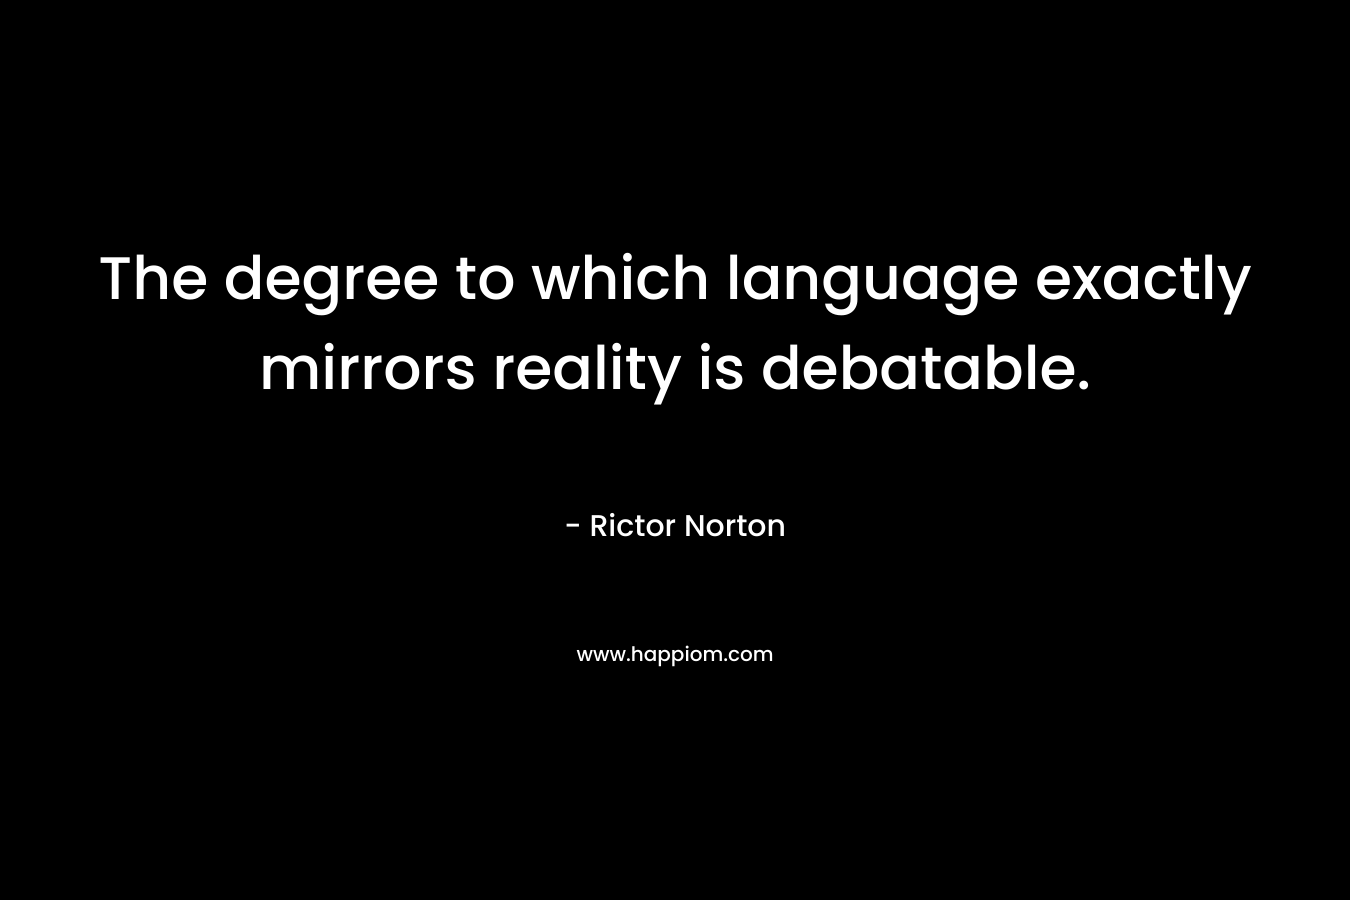 The degree to which language exactly mirrors reality is debatable. – Rictor Norton